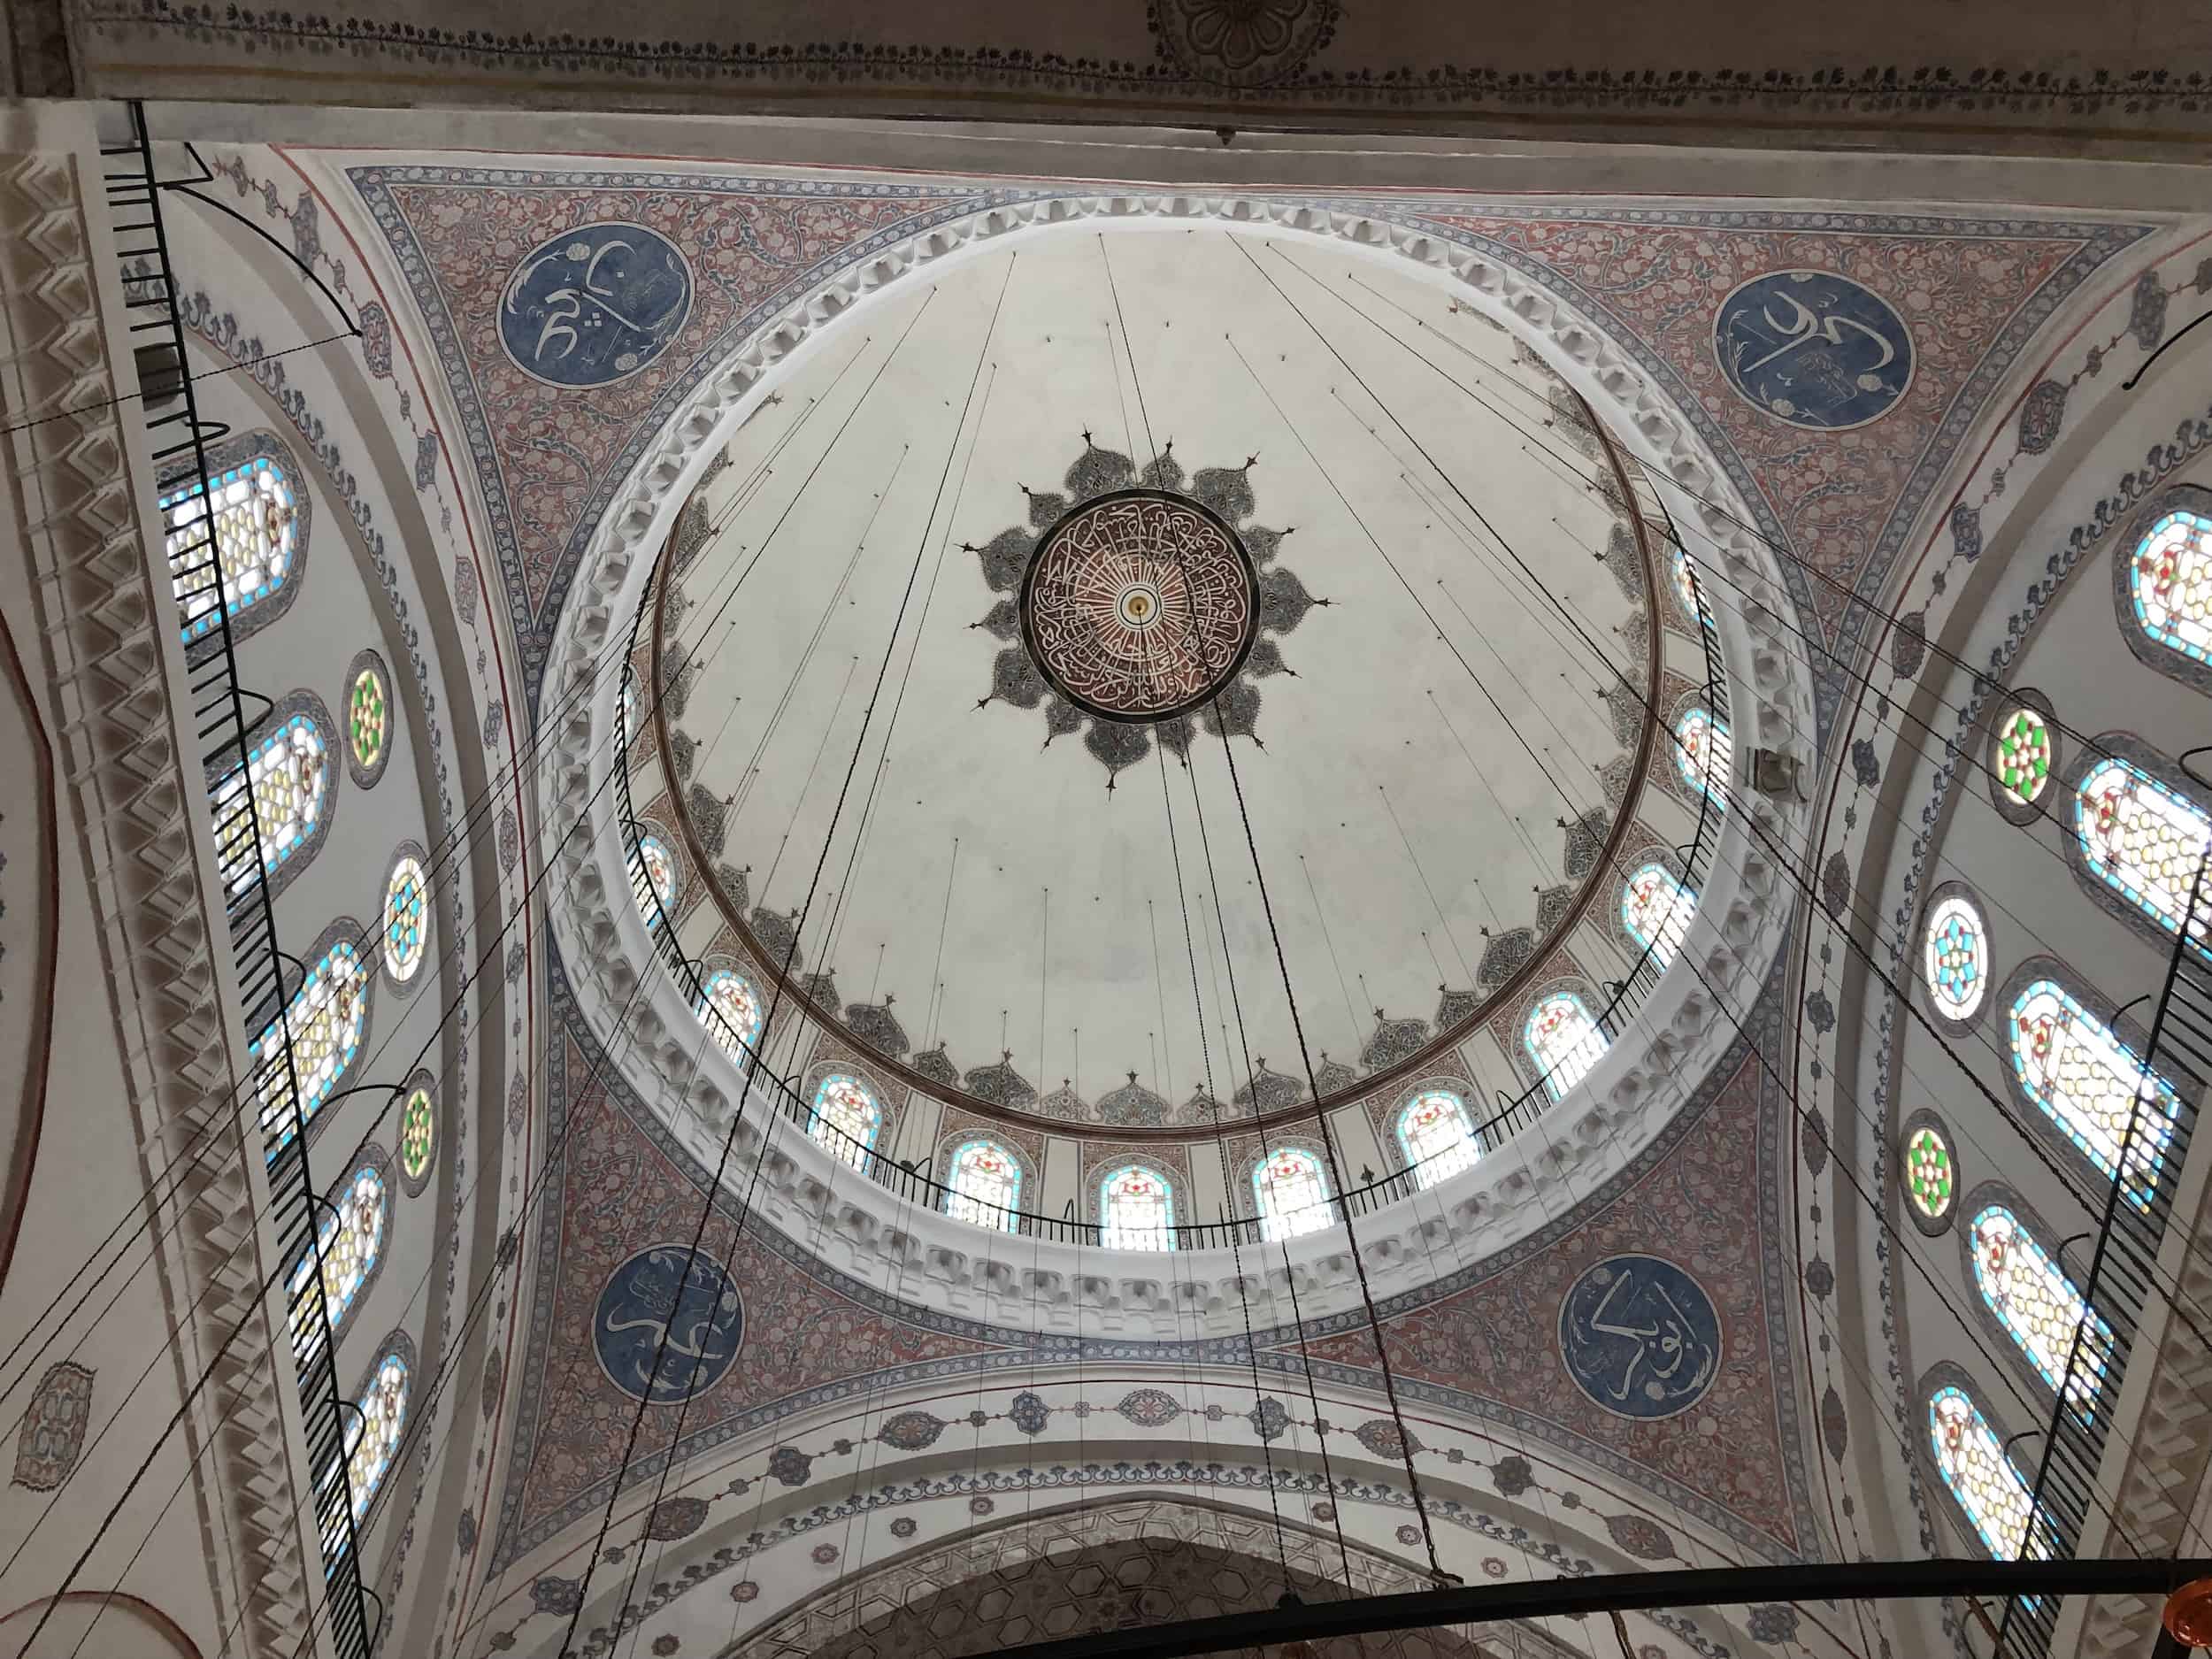 Dome of the Bayezid II Mosque in Istanbul, Turkey